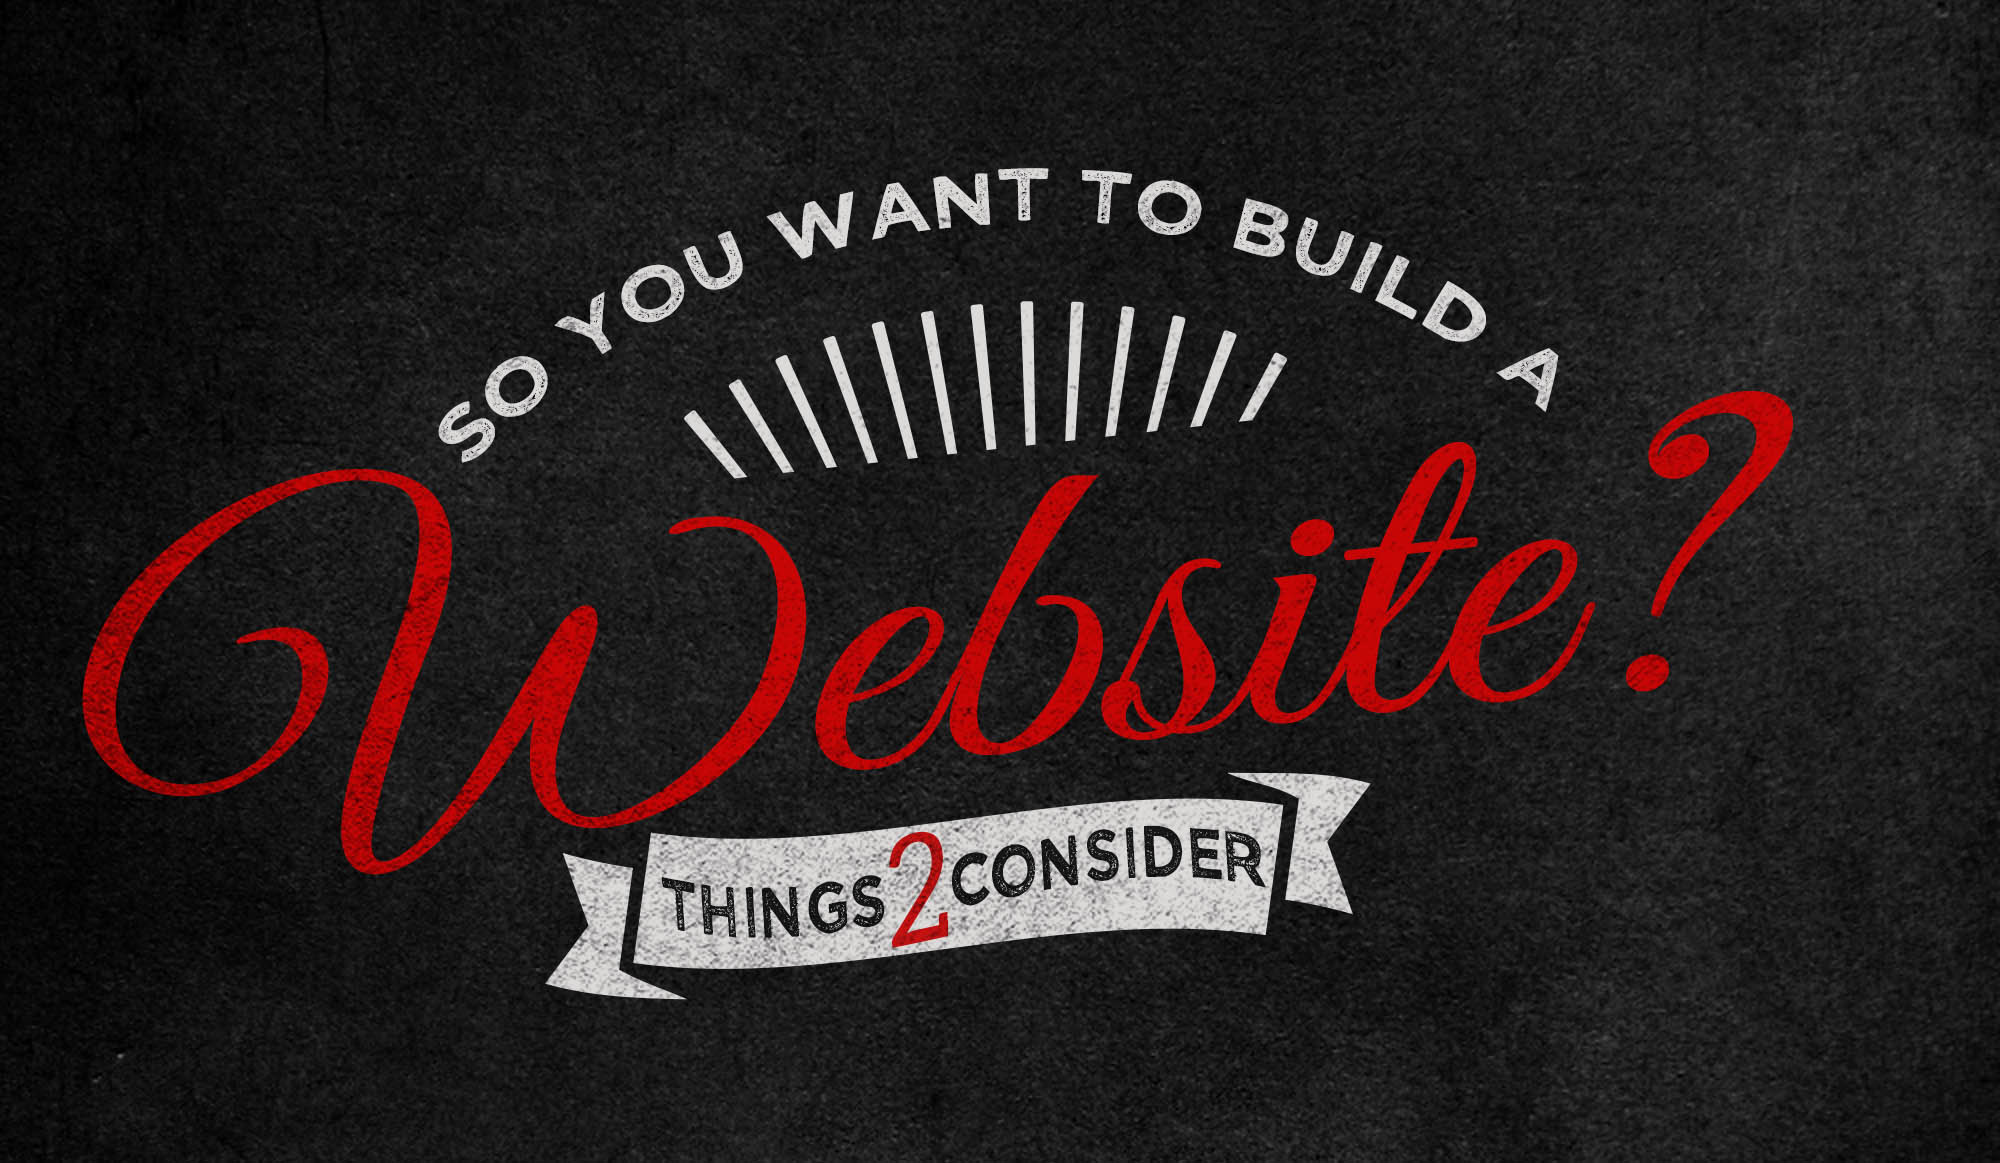 Want to build a website?